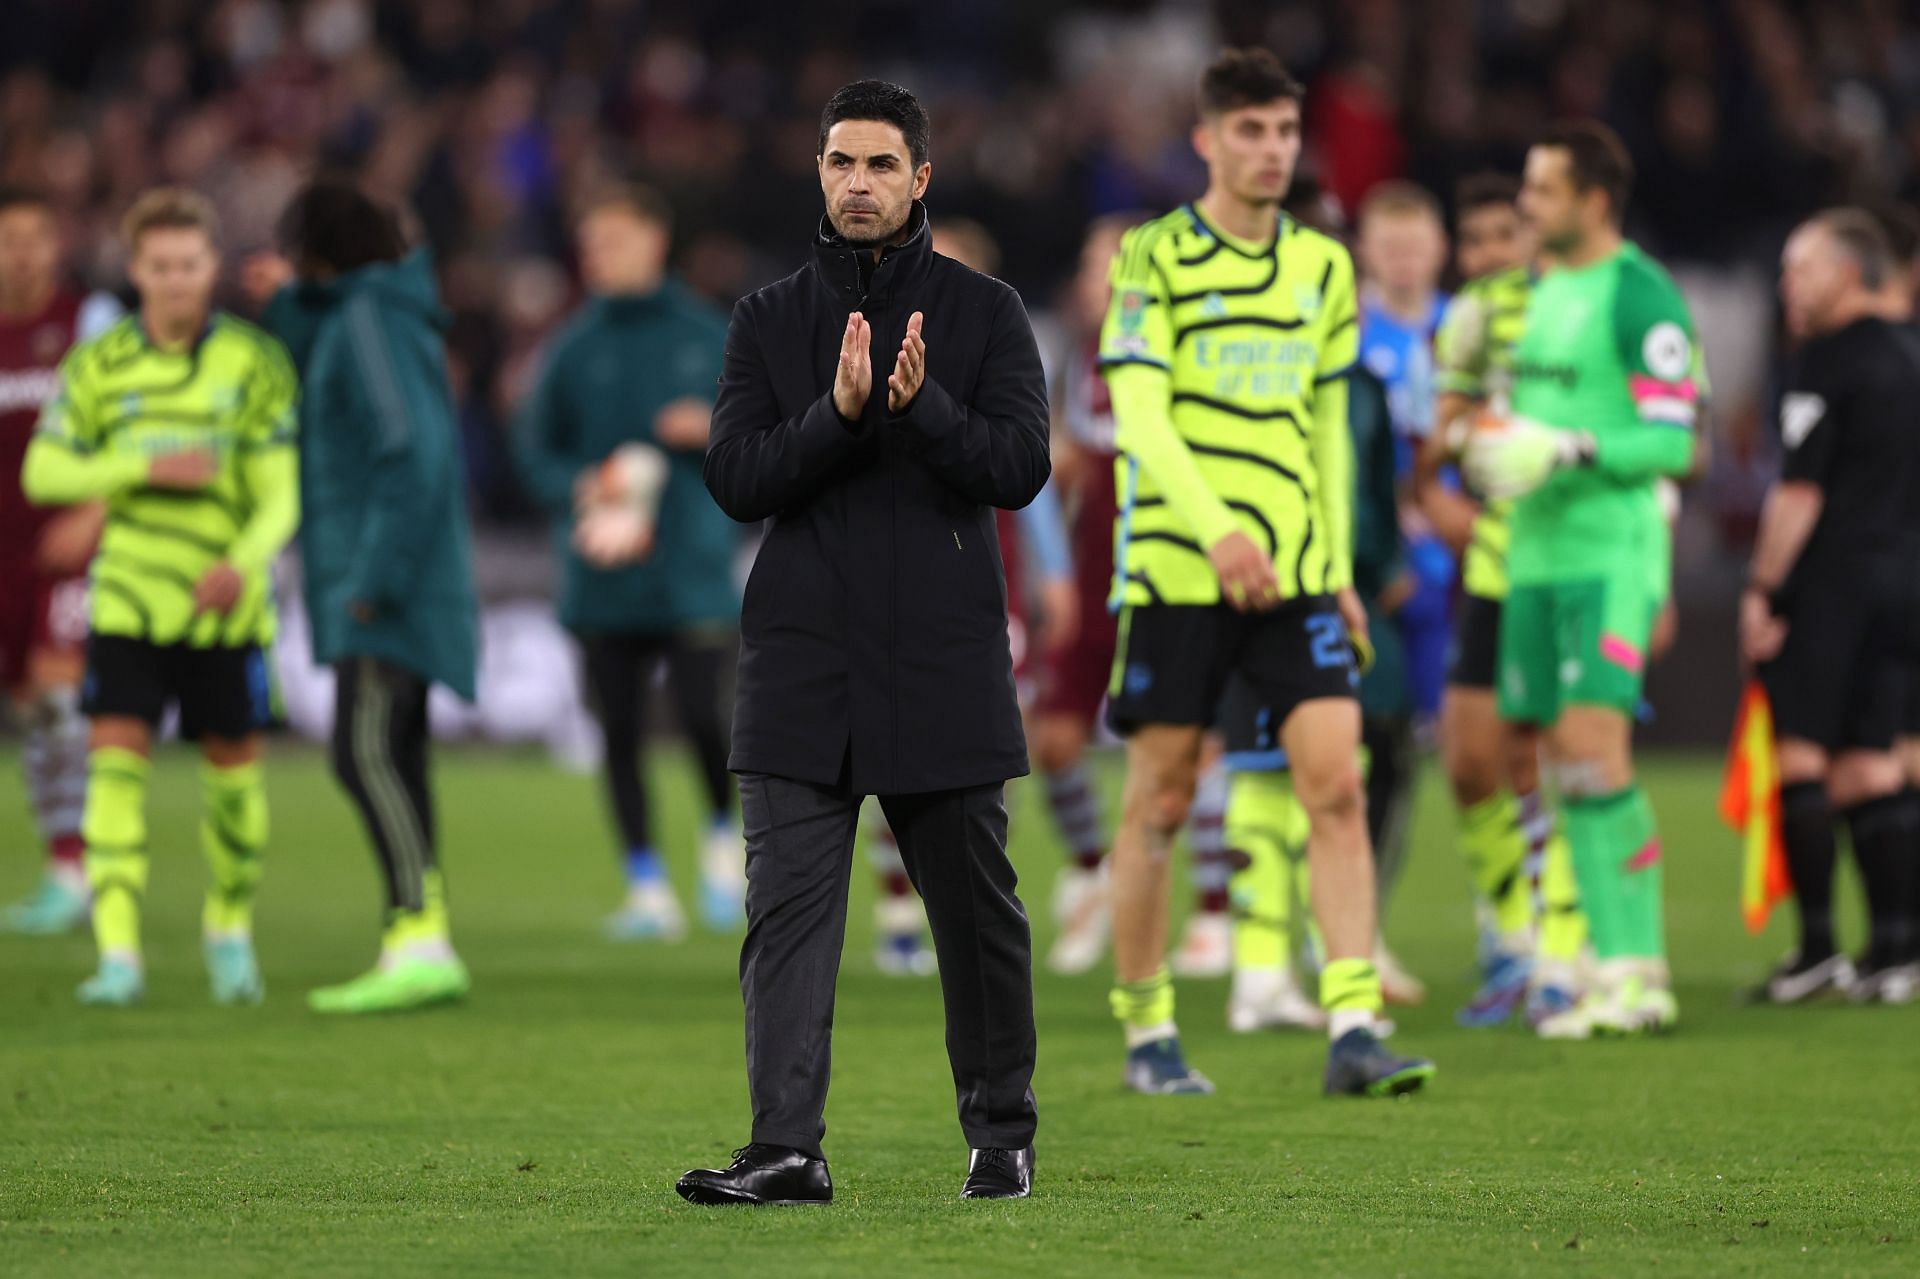 Arsenal made a disappointing exit from the Carabao Cup.